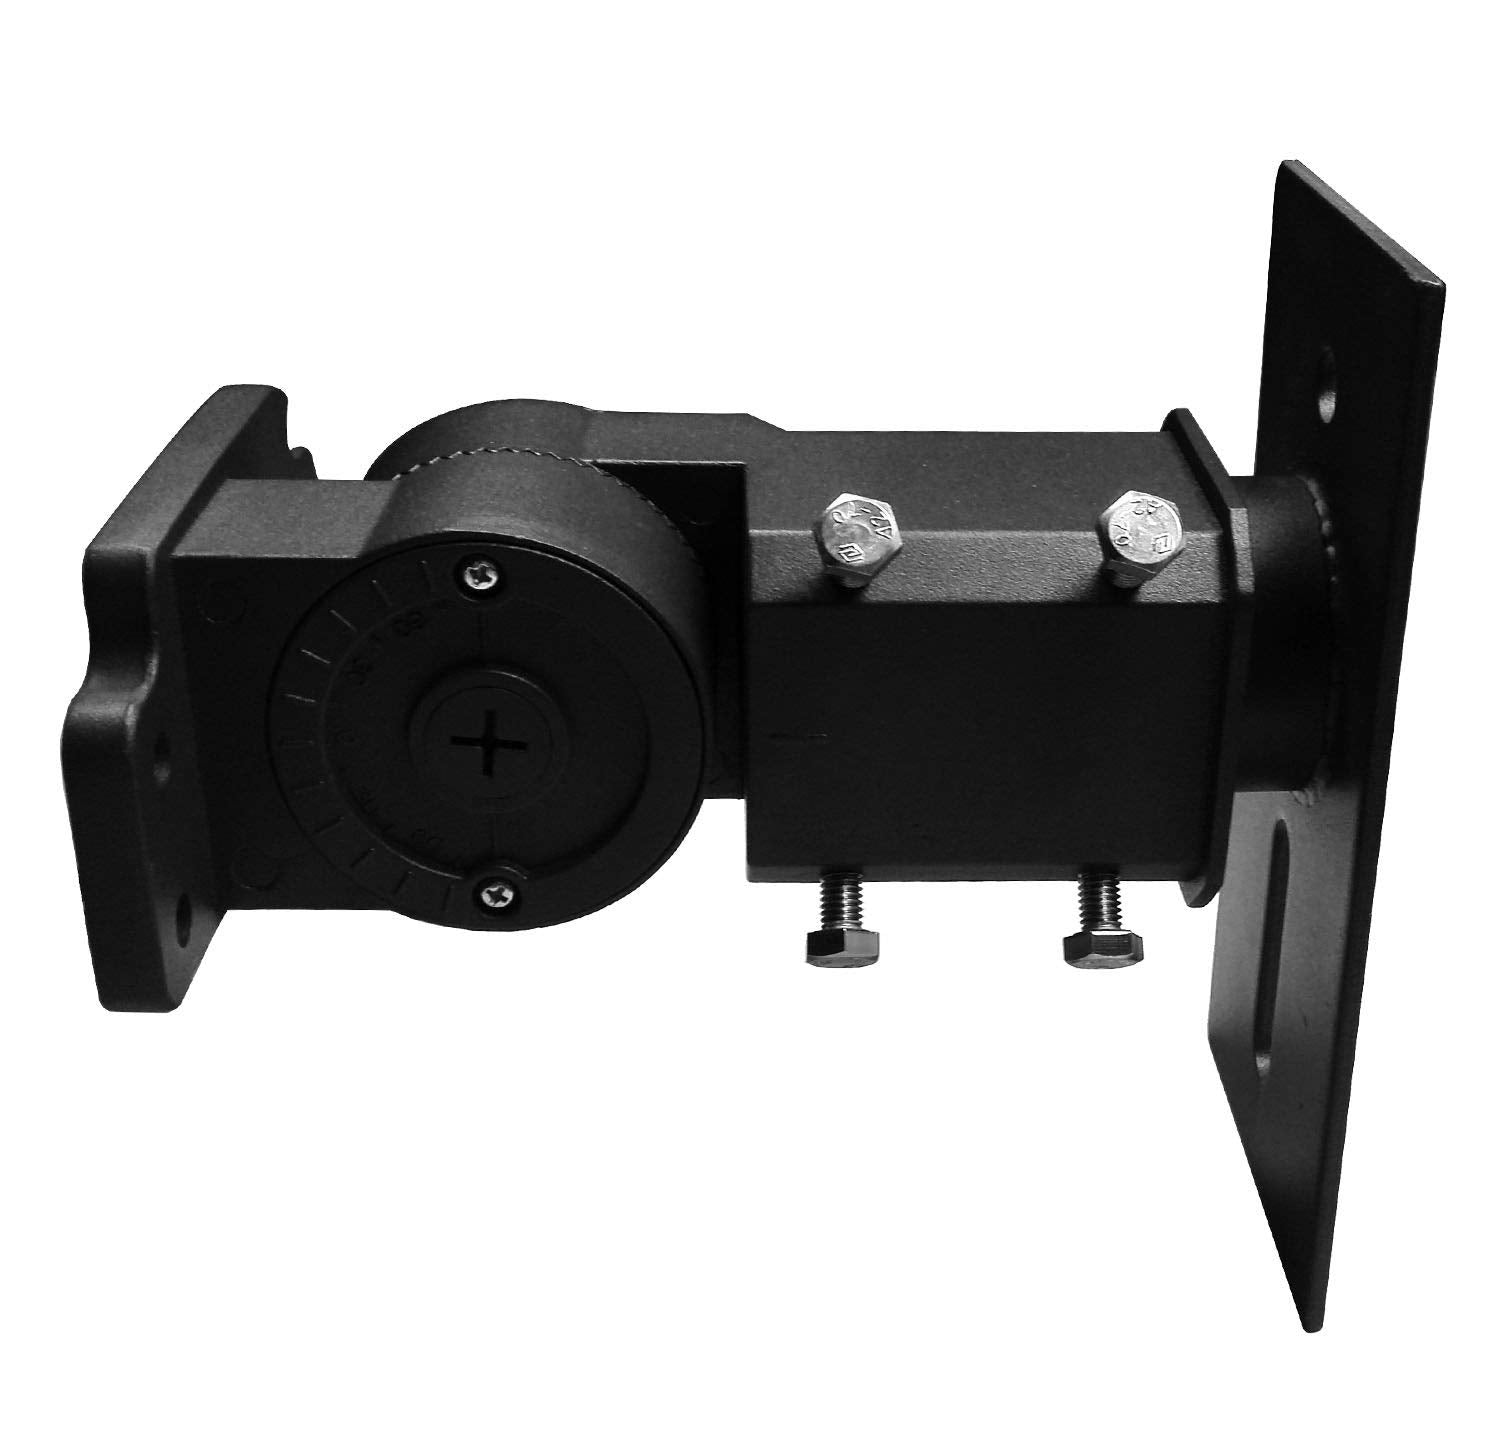 Fixture Mounting Brackets Adaptor For Shoebox Light And Pole